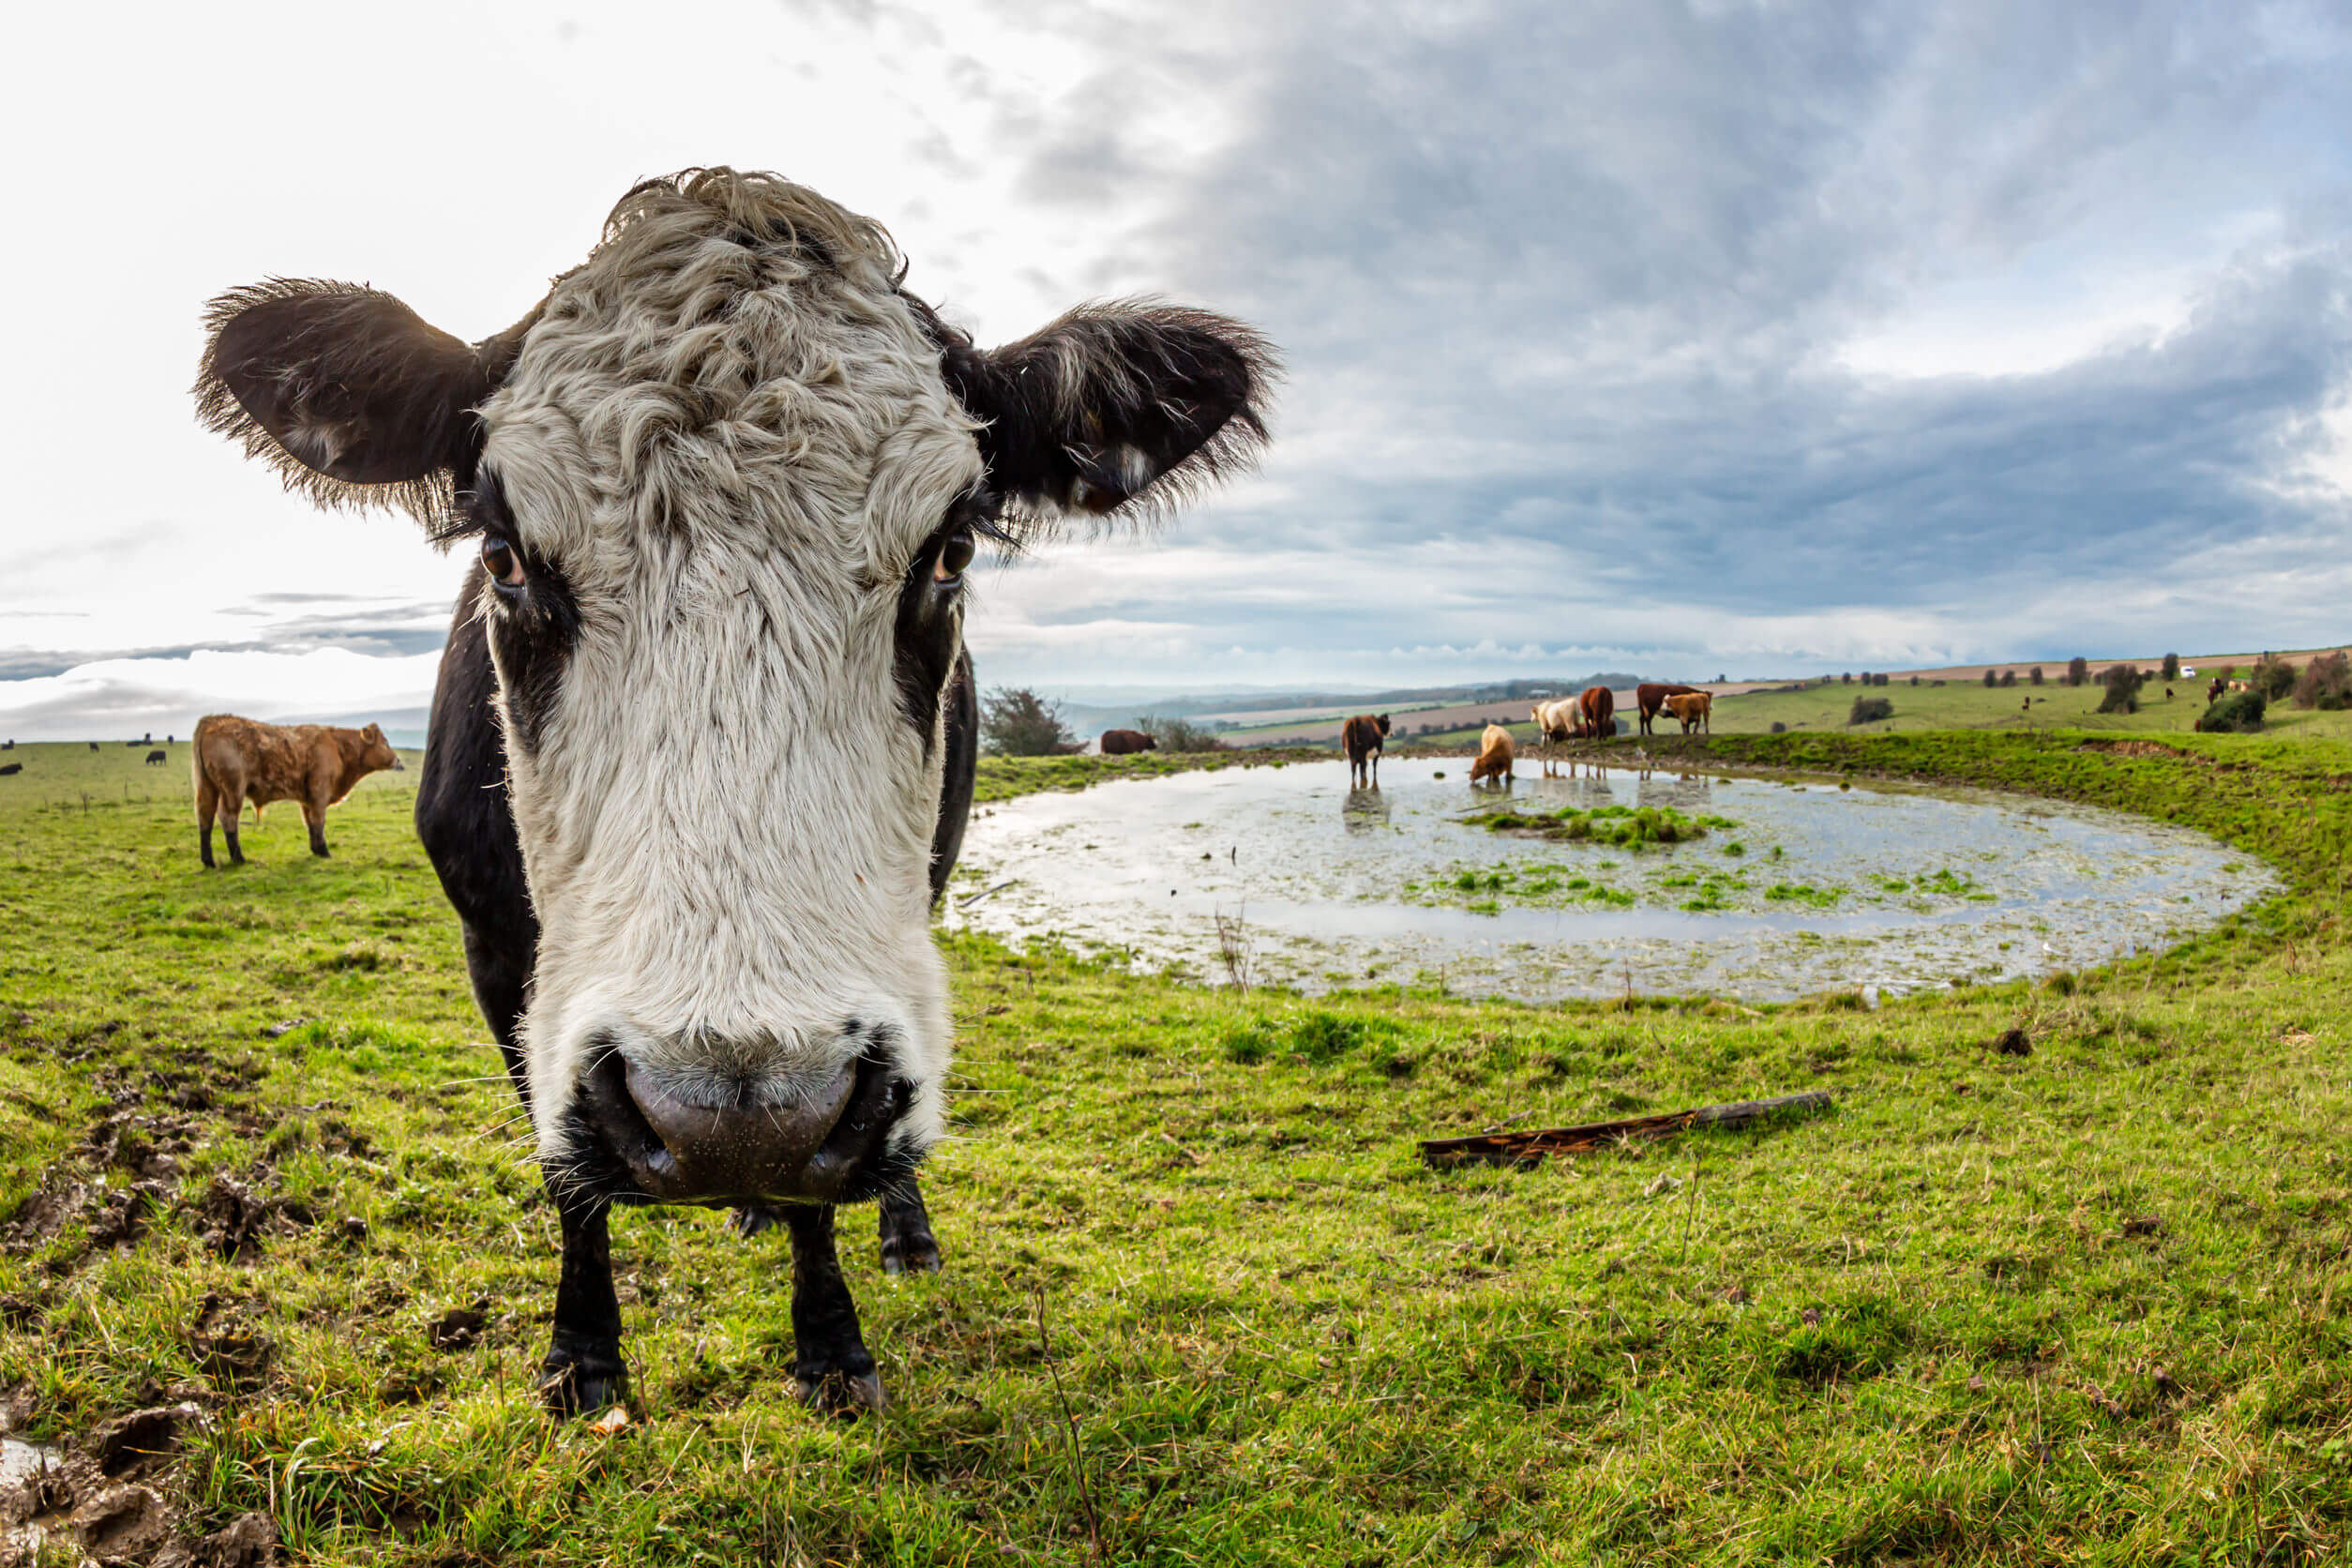 A cow standing near a dew pond on Ditchling Beacon in Sussex, taken with a fish eye lens